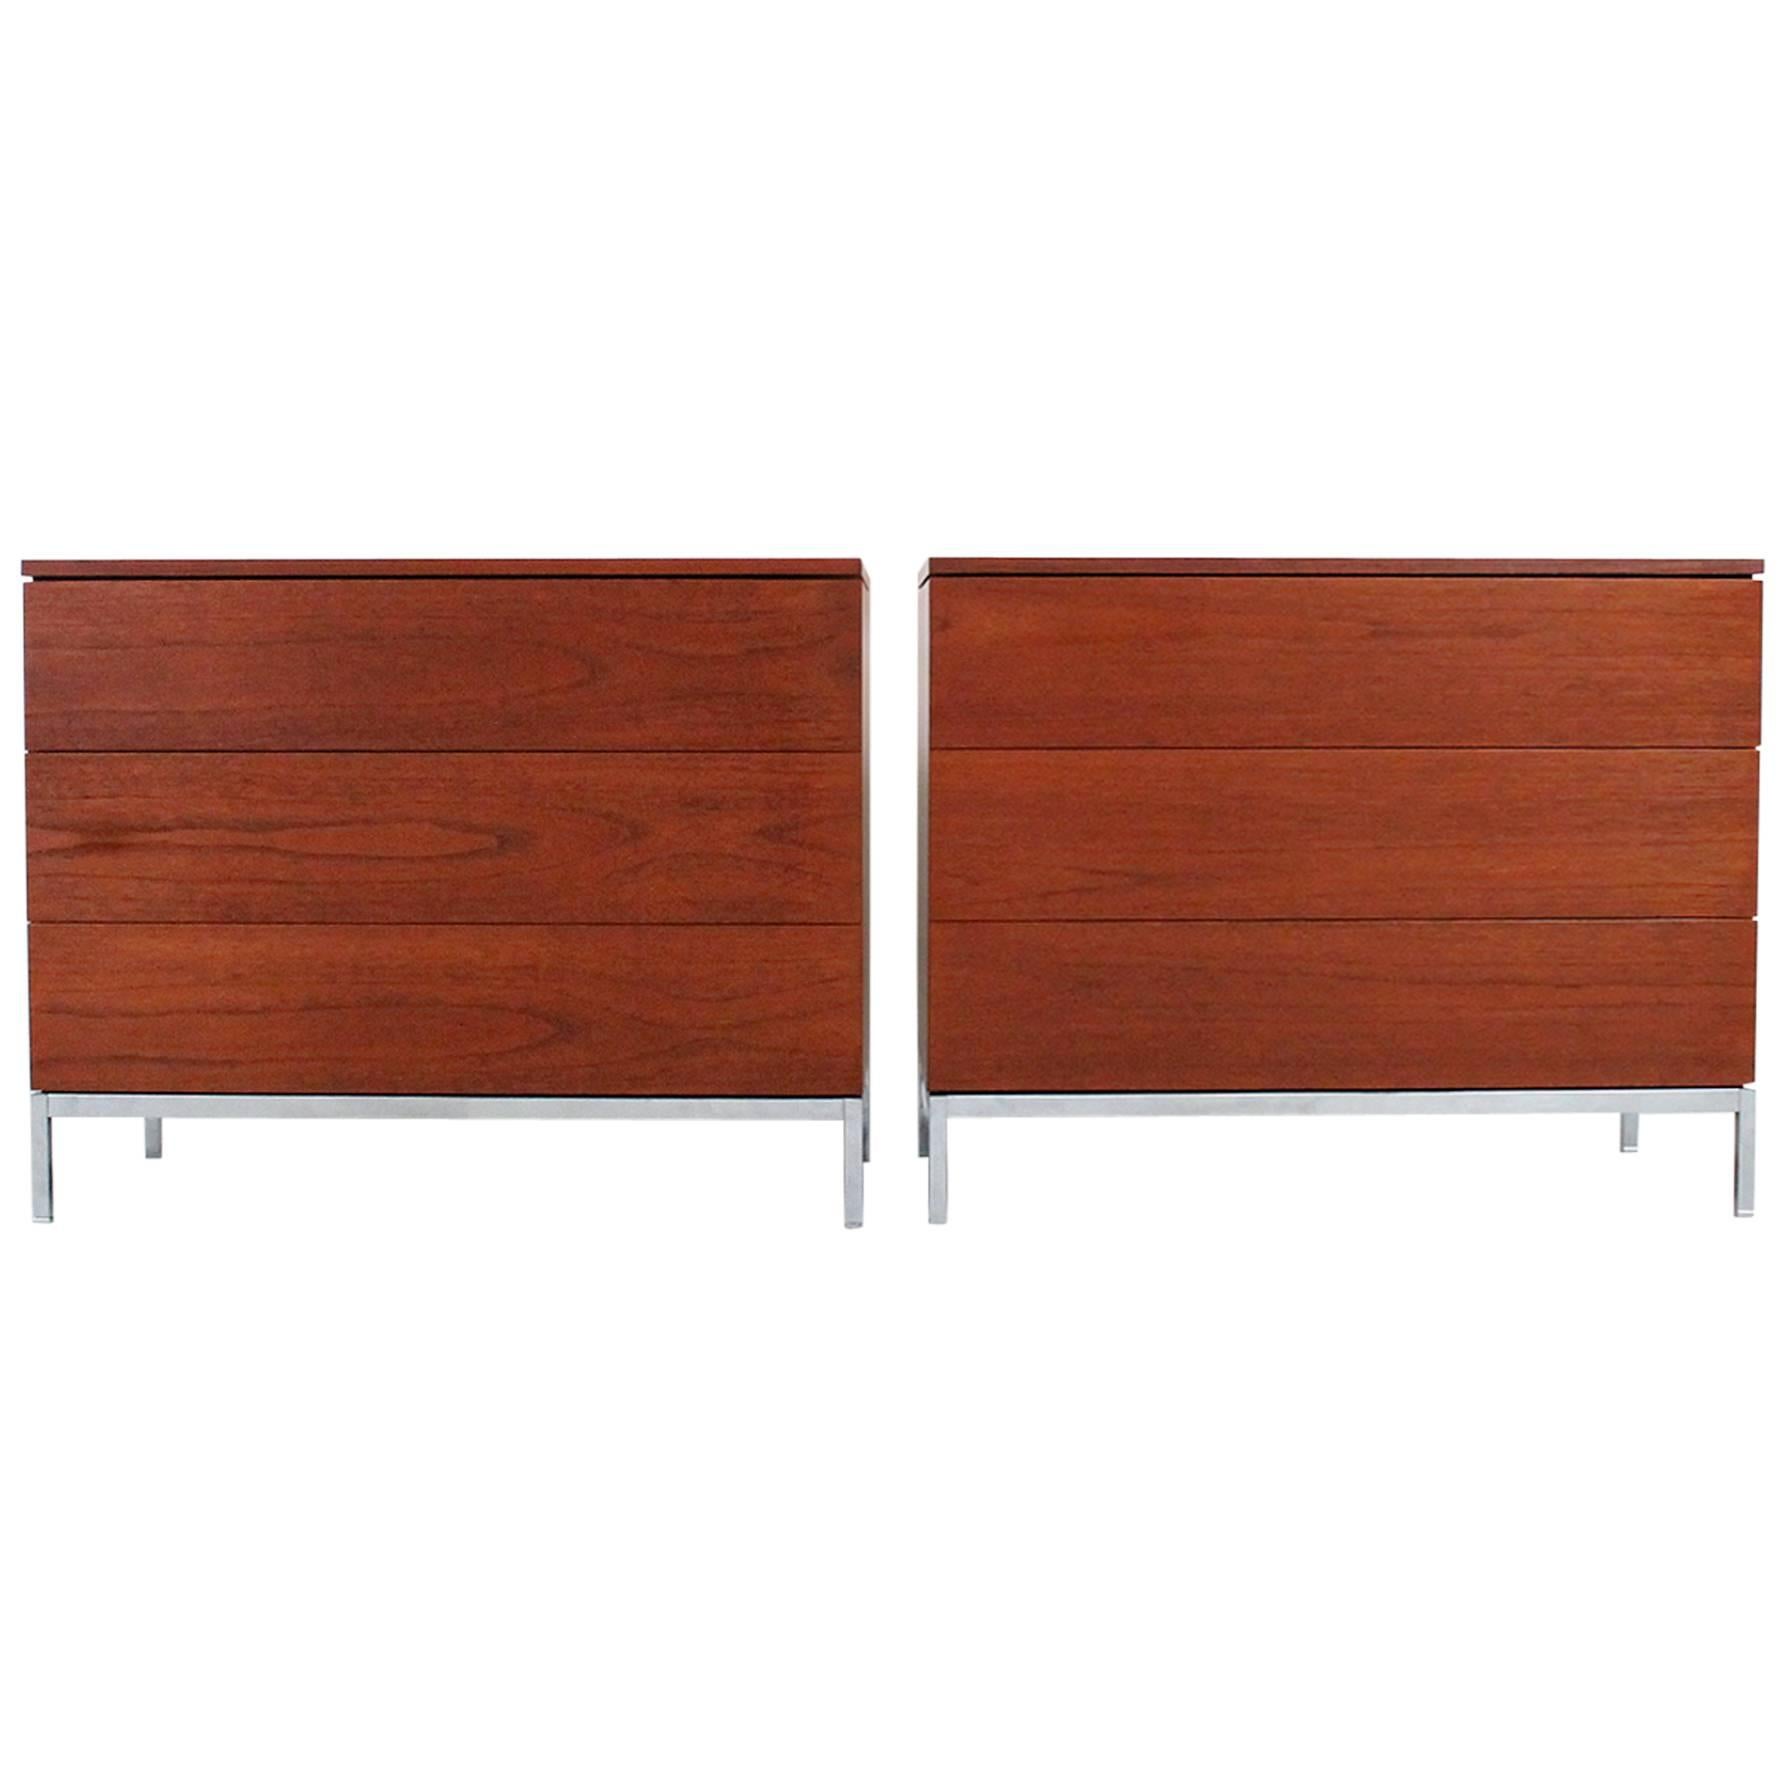 Pair of Teak Dressers by Florence Knoll